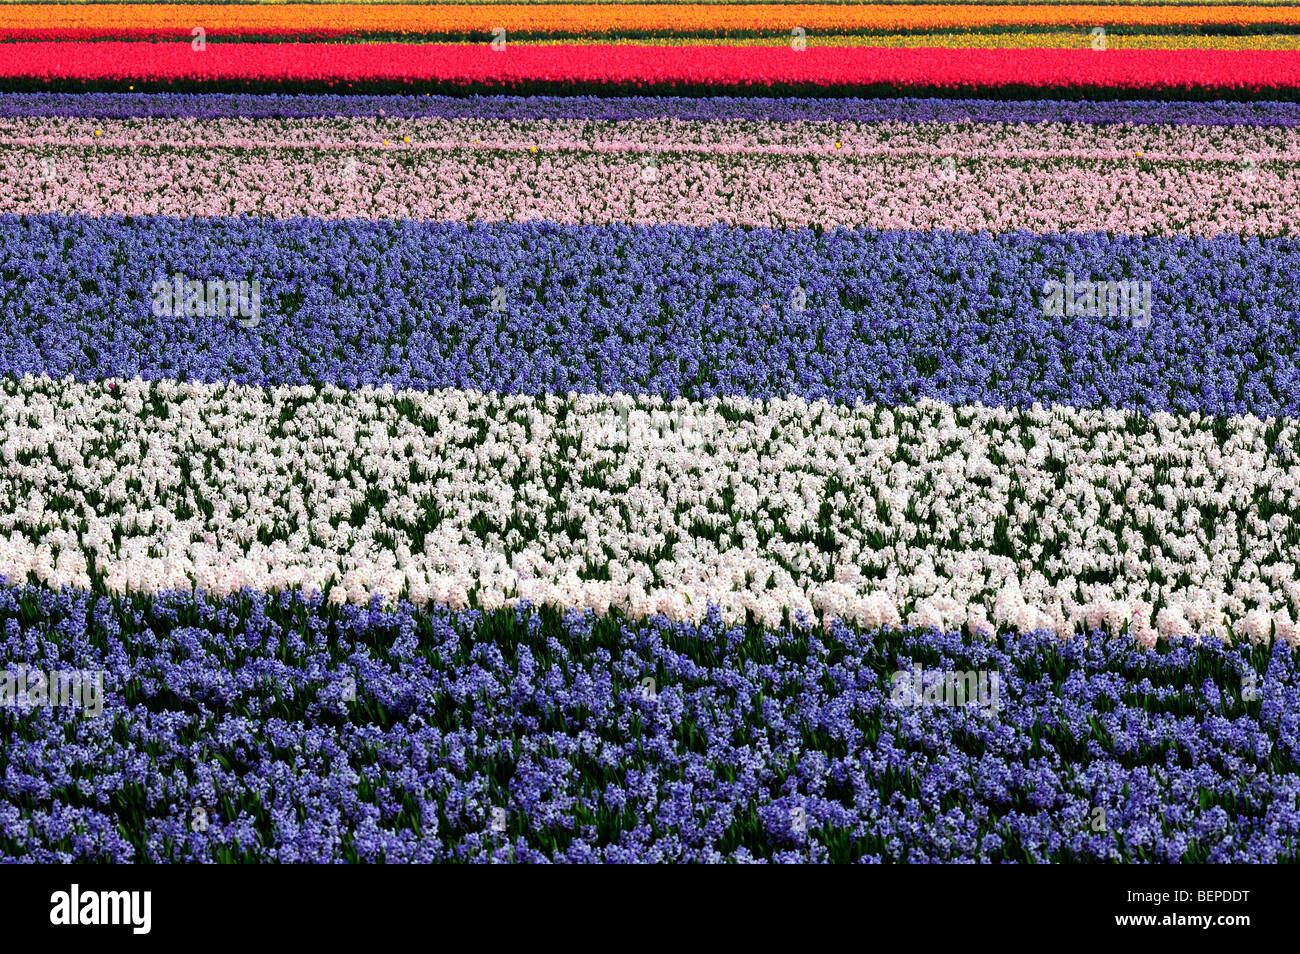 Field with rows of colourful cultivated hyacinths in Holland, the Netherlands Stock Photo